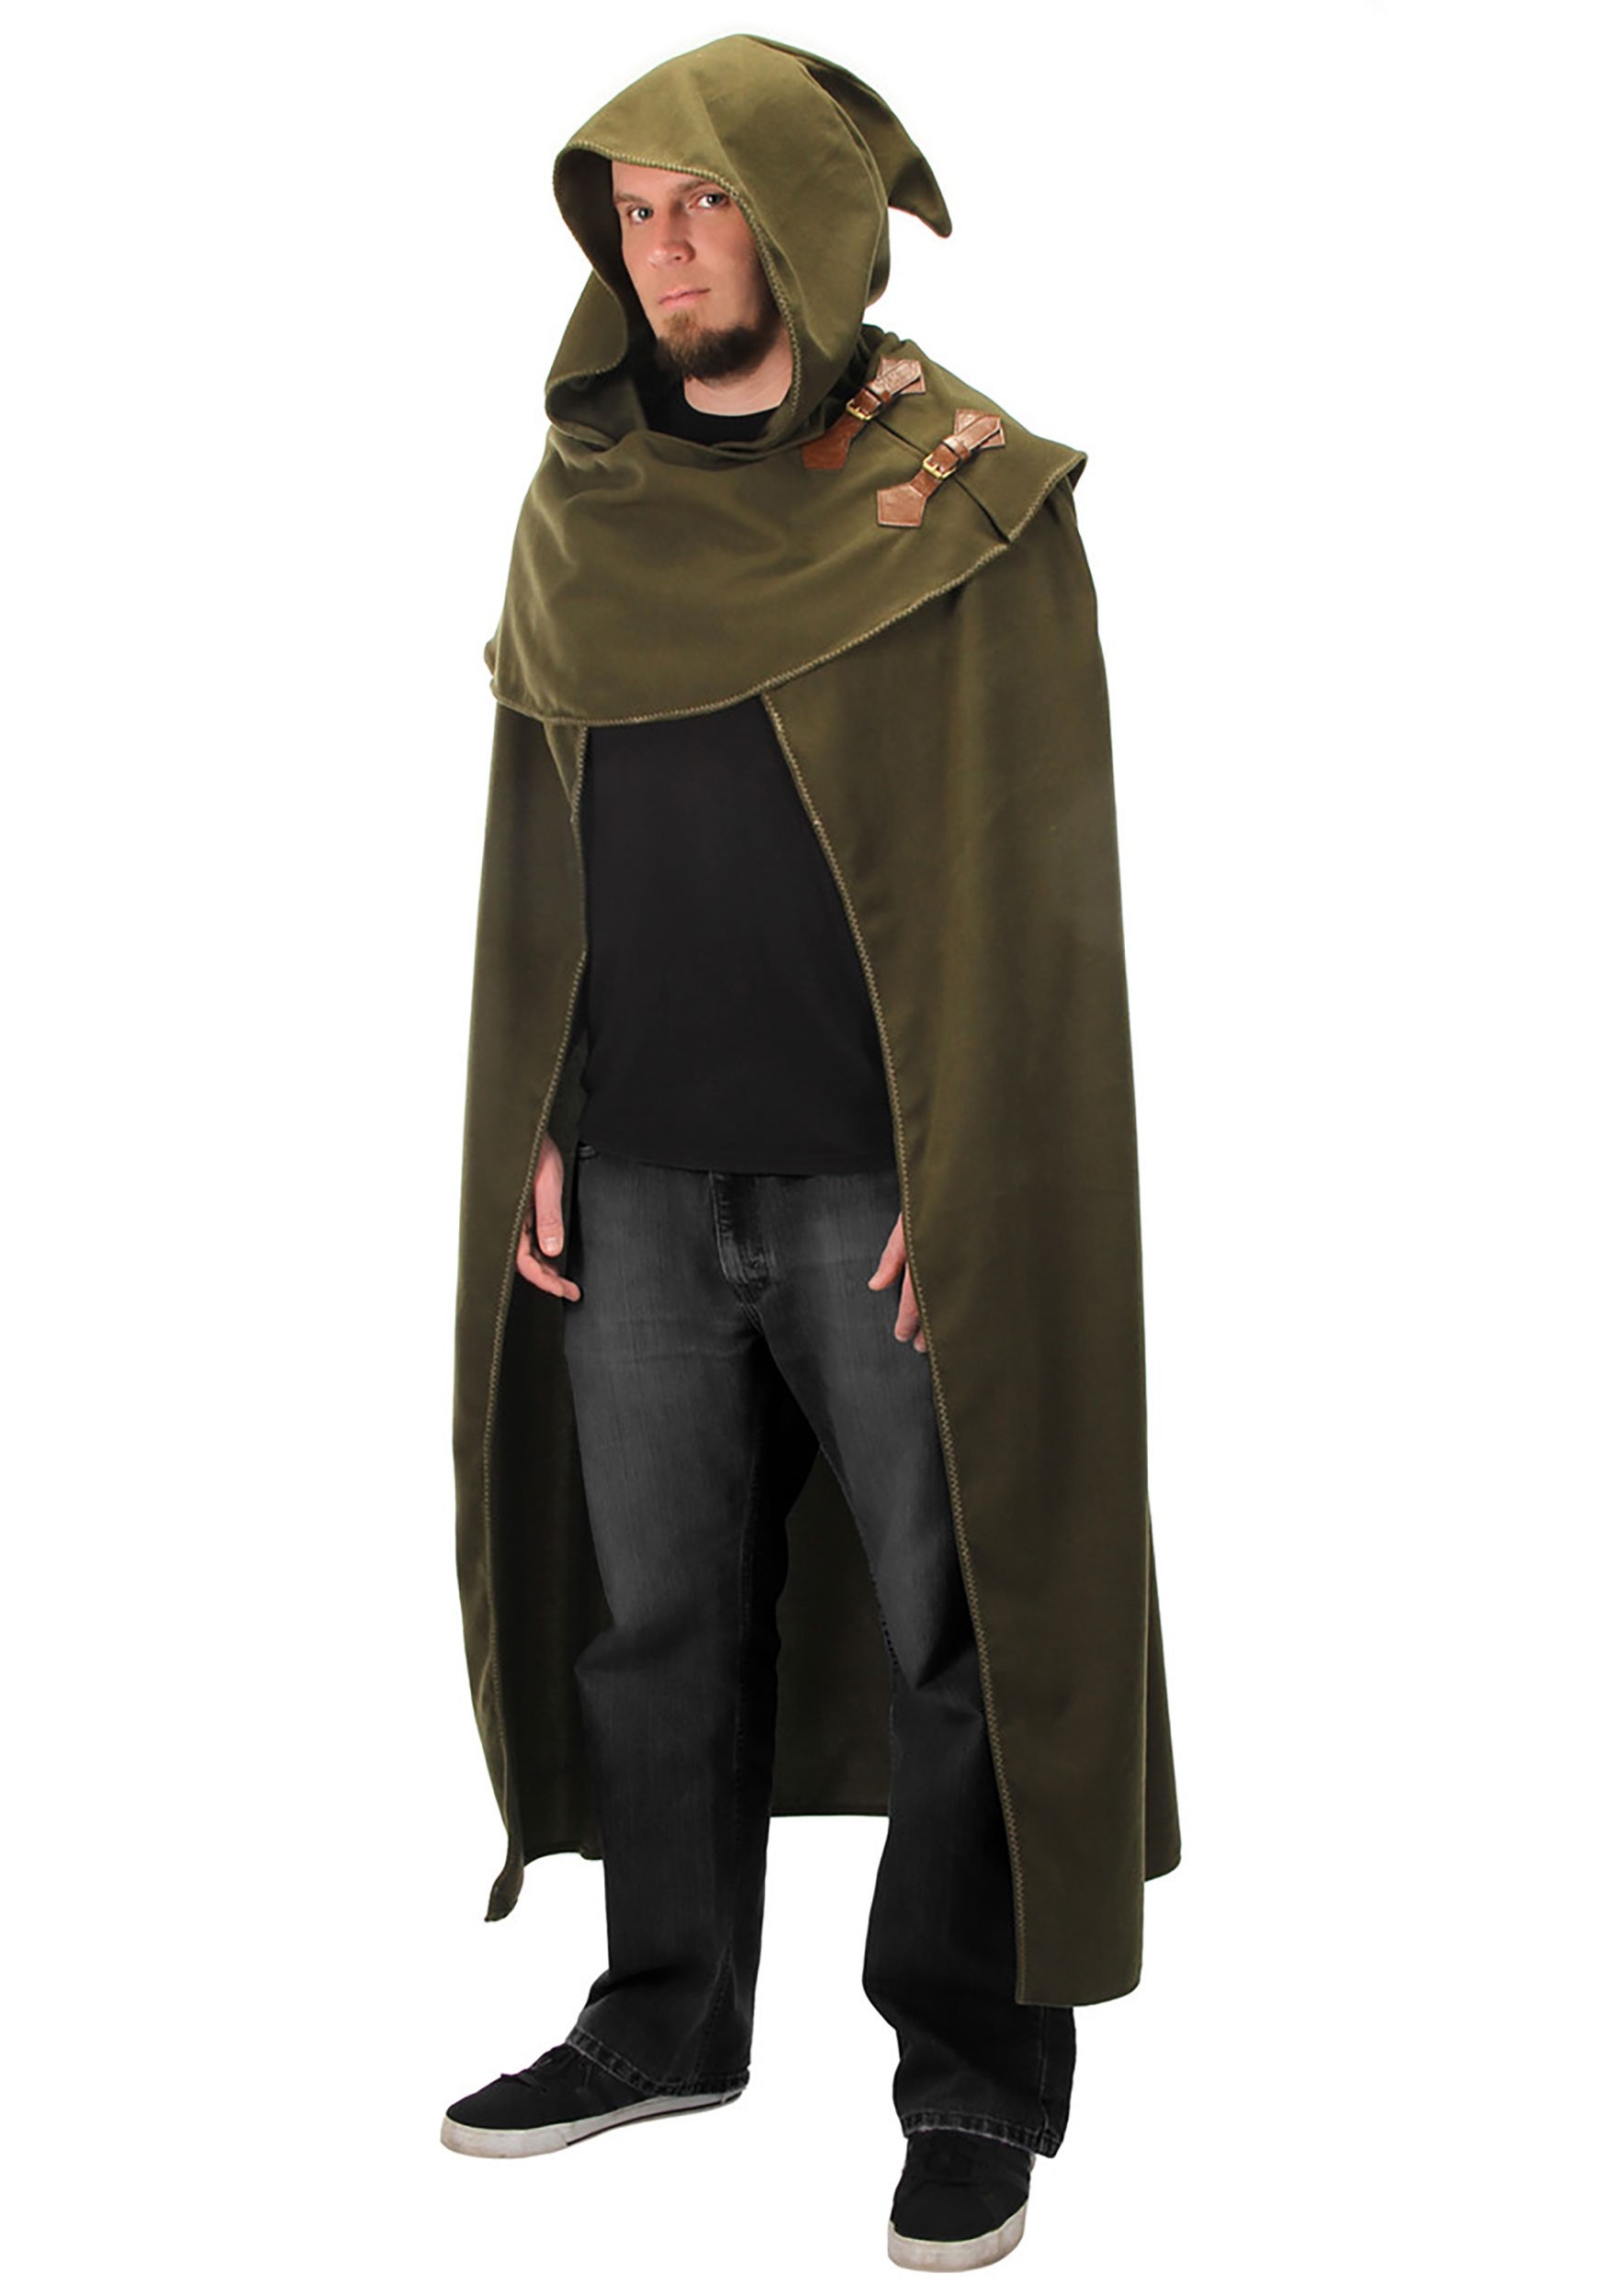  Renaissance Costume for Boys - Kids Medieval Cloak With Hood  Halloween Ranger Wizard Elven Hooded Cape Robe : Clothing, Shoes & Jewelry